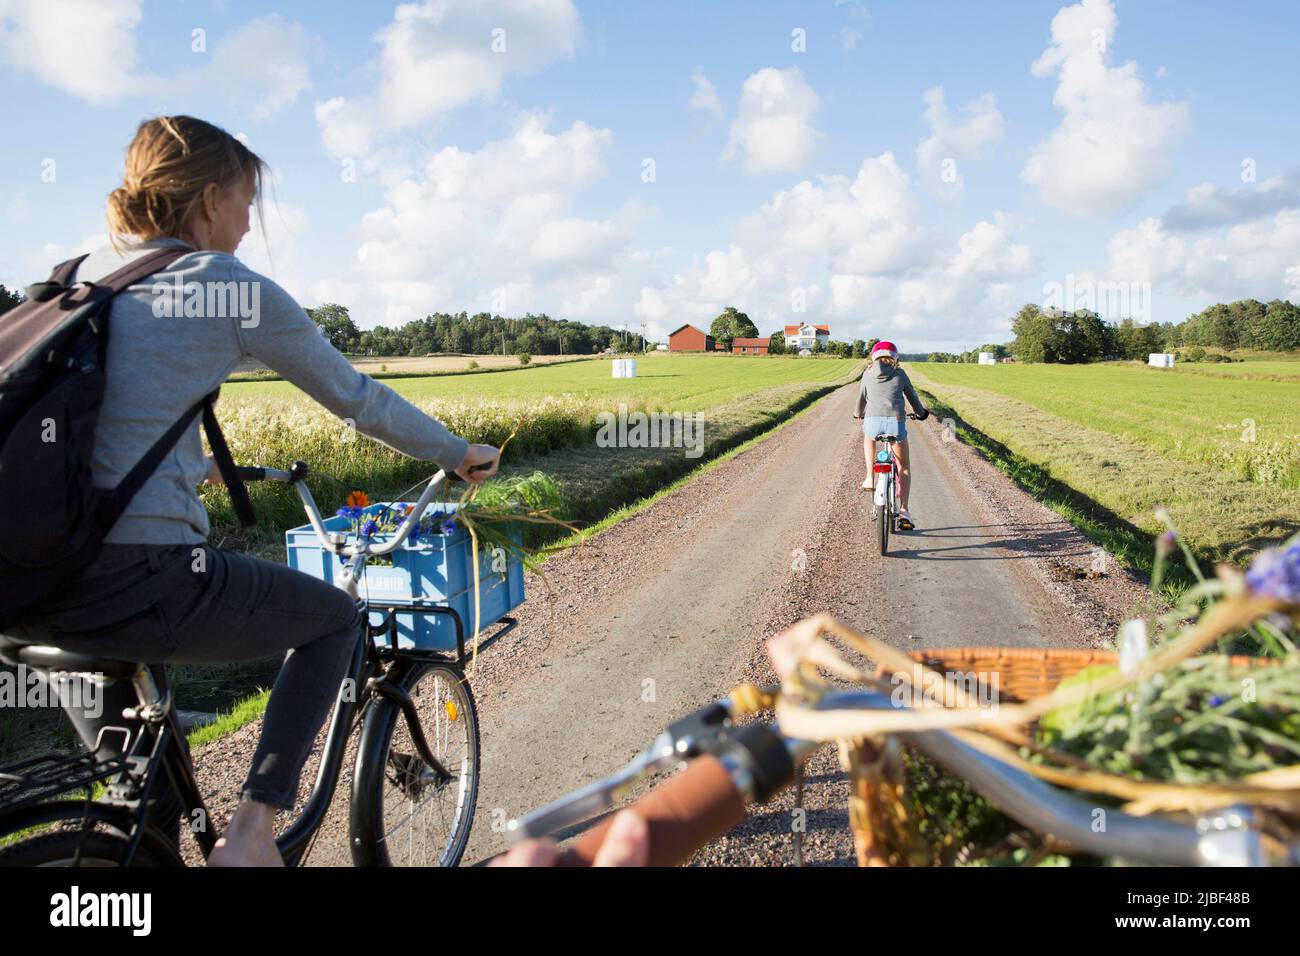 Family cycling on rural road Stock Photo